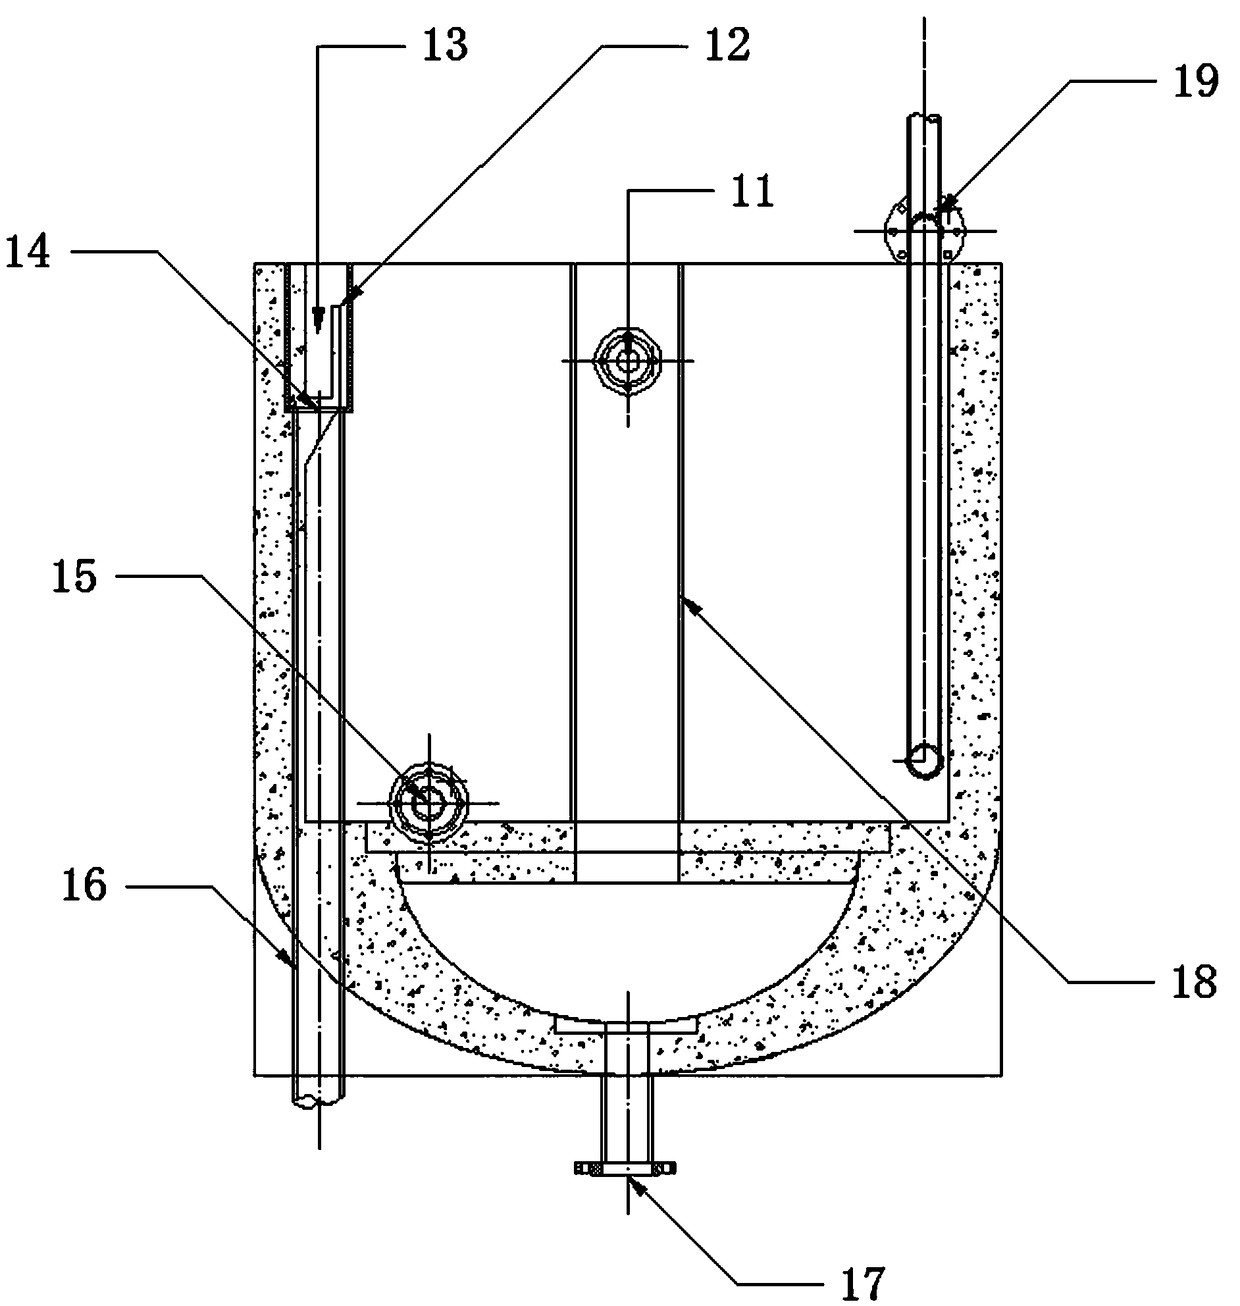 A turbulent flow electrolyzer and a turbulent flow electrolysis production system composed of turbulent flow electrolyzers